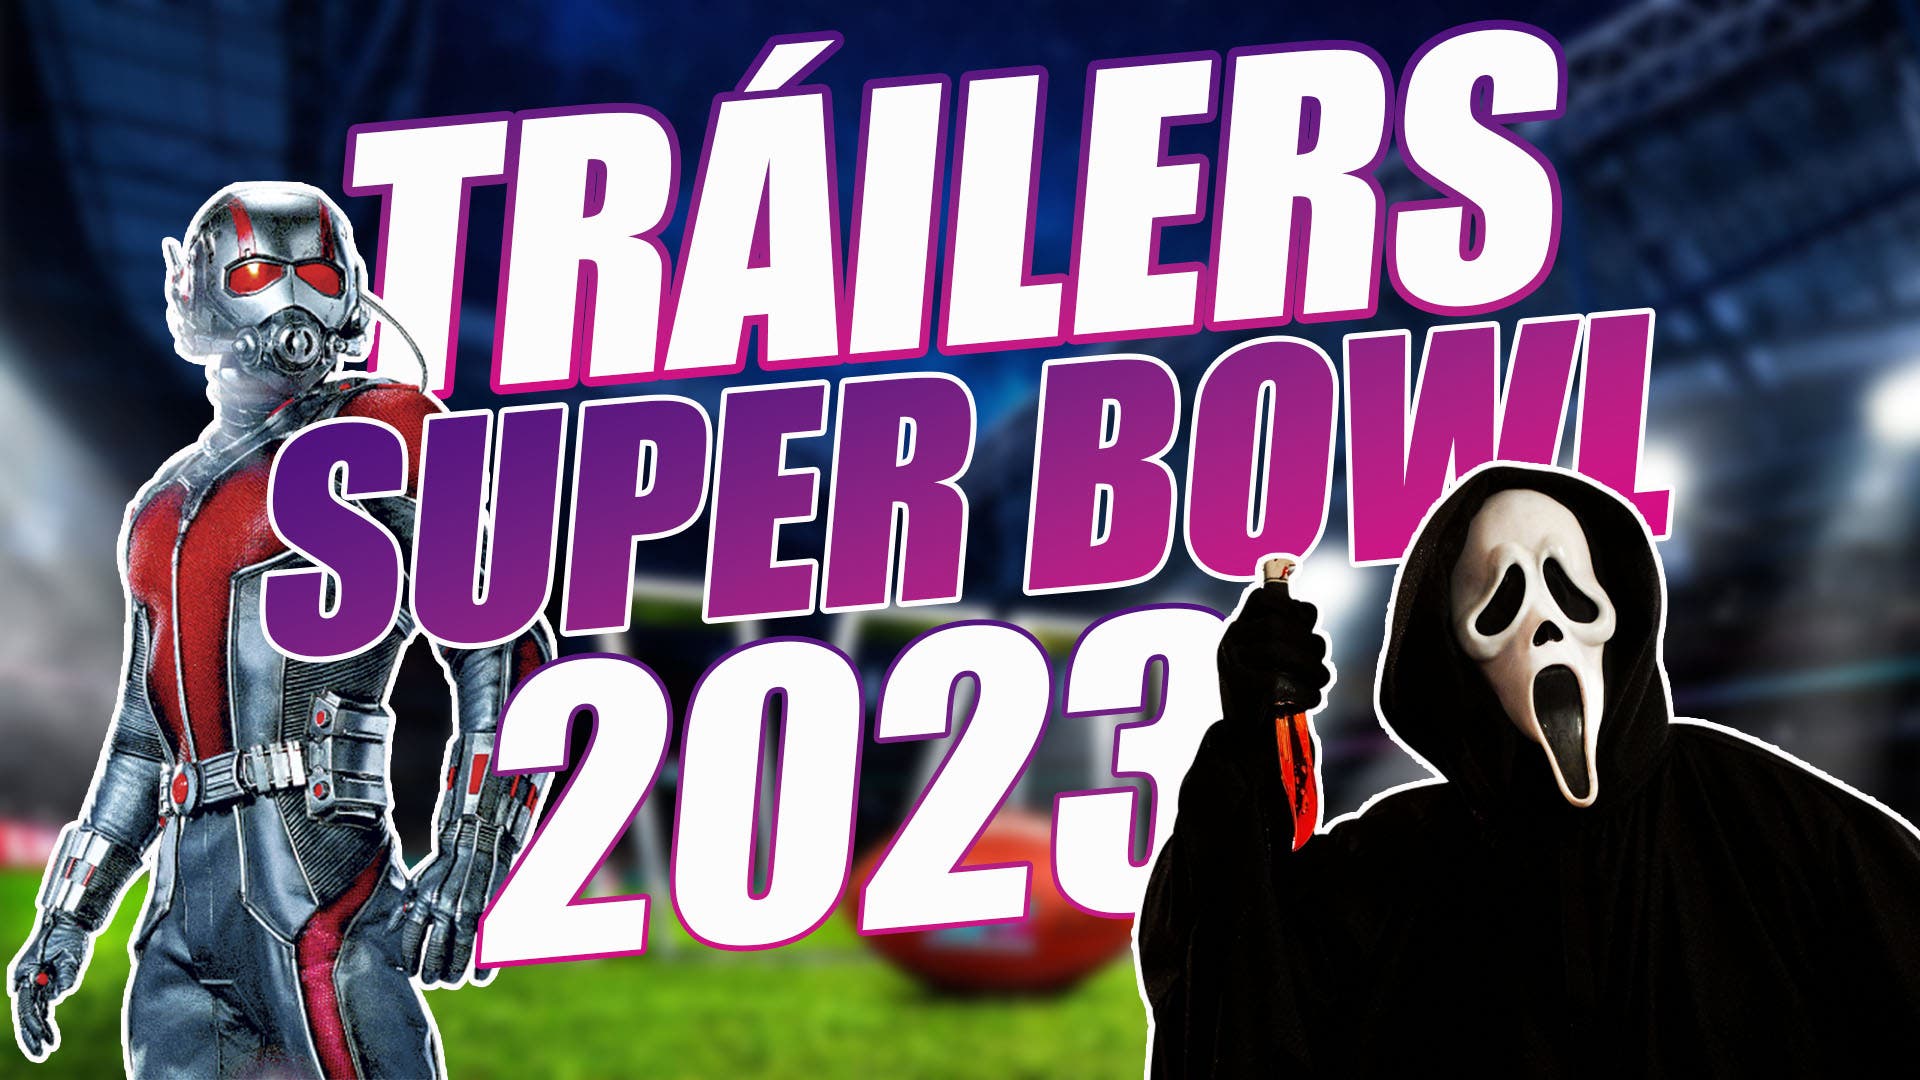 These are the trailers that can be seen in the Super Bowl 2023